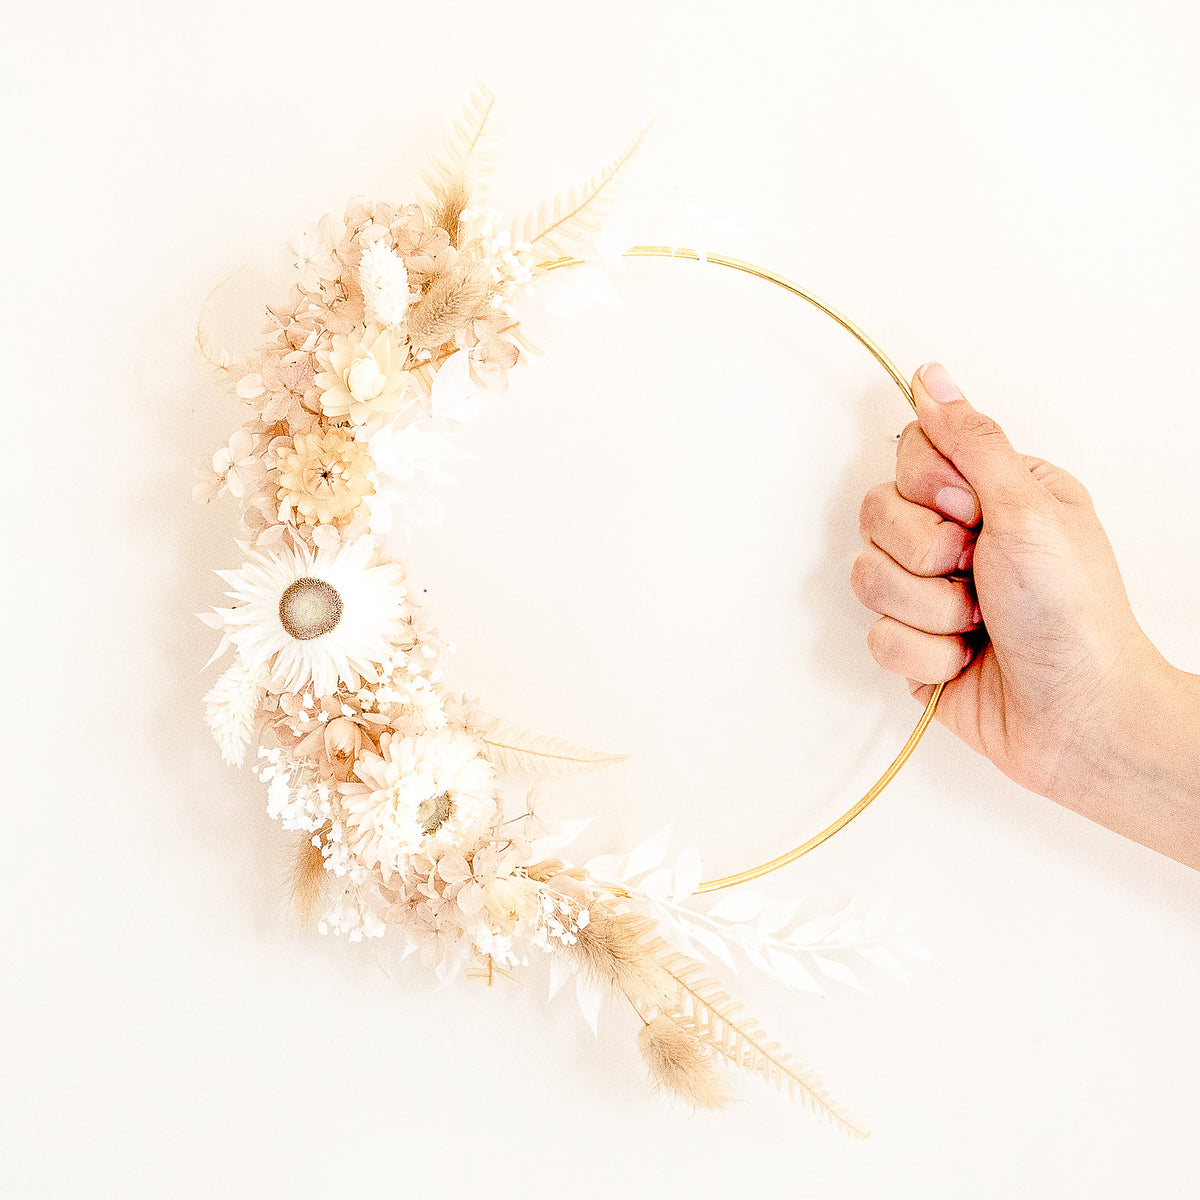 Discover the Beauty and Meaning Behind Wreaths: A Guide to Wreath Making